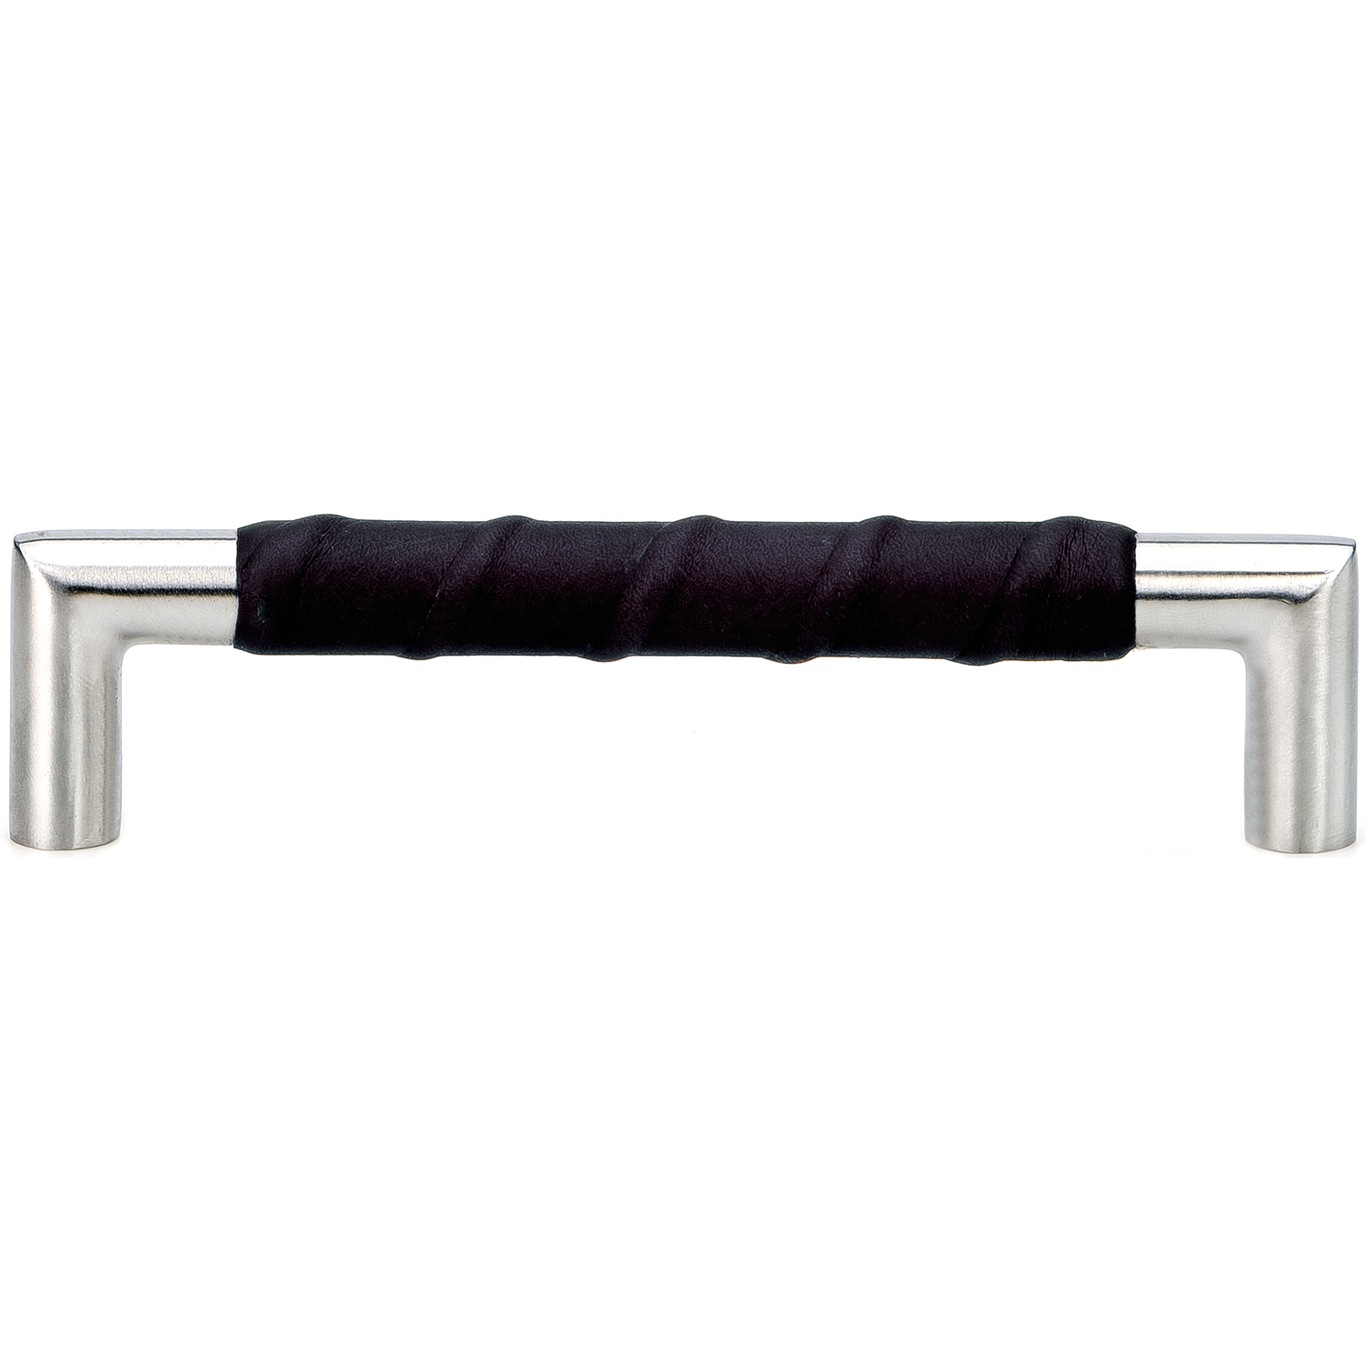 Norma Handle Stainless/Black Leather, CC 128